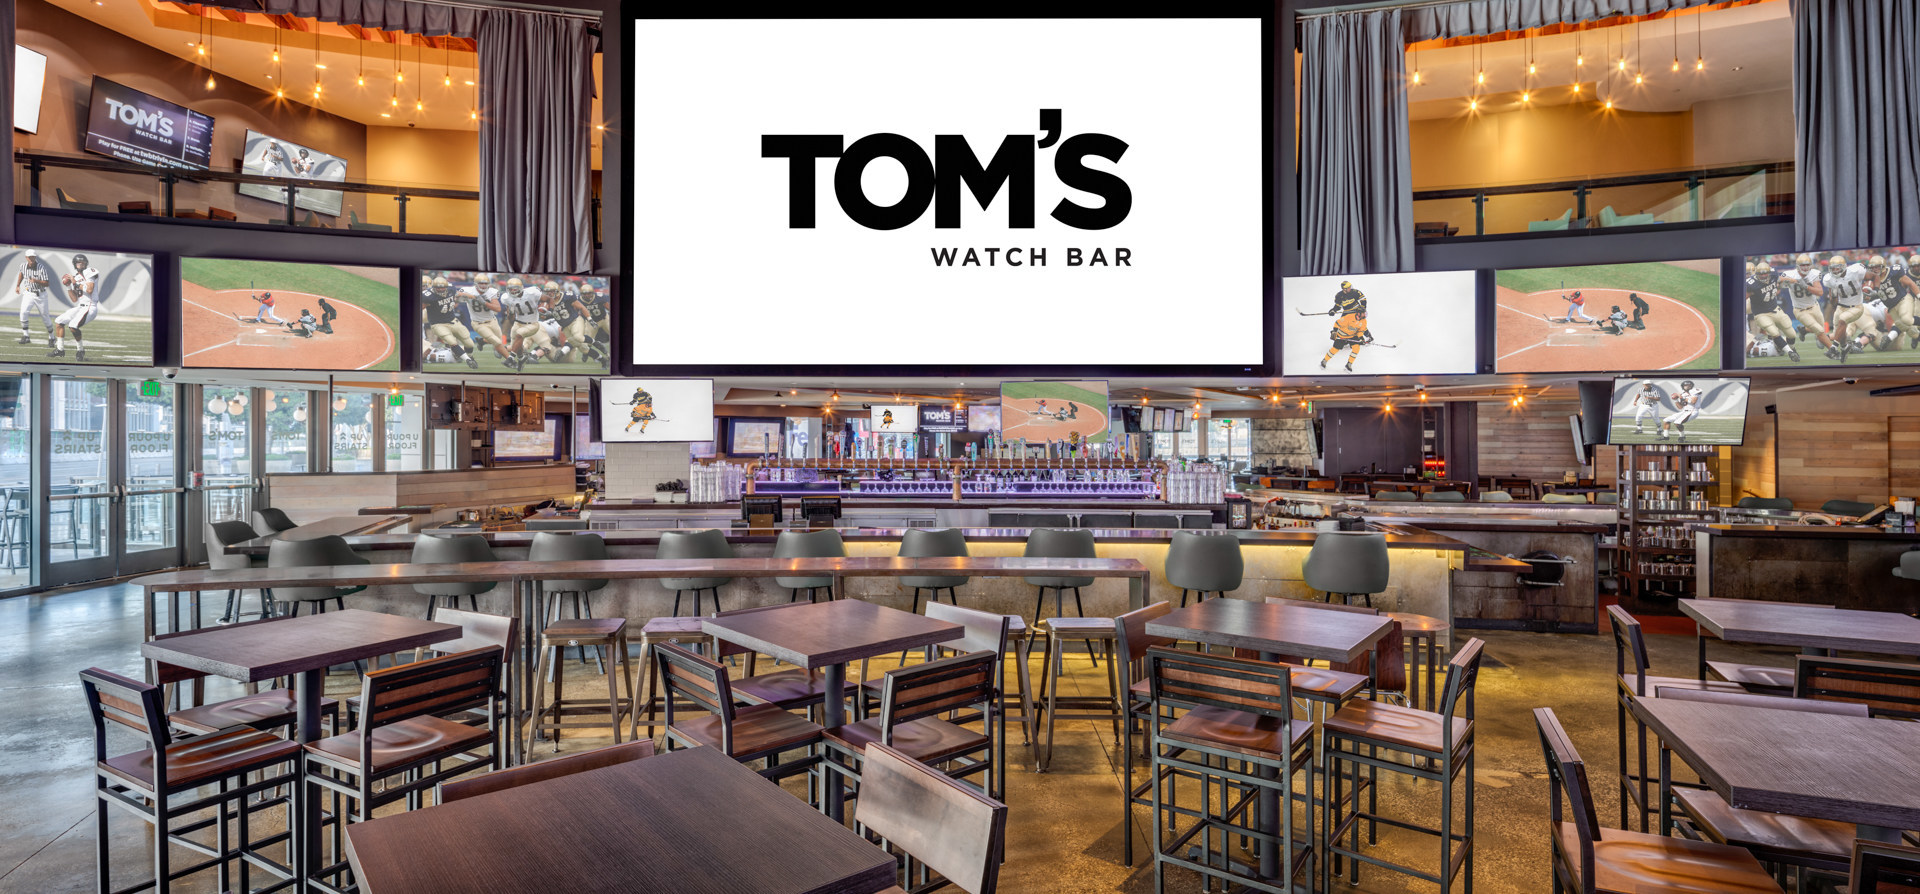 Tom's Watch Bar, the country's new super sports bar concept, announces completion of a $30M fundraising and construction of 8 new Super Sports Bars in ultra-high traffic locations